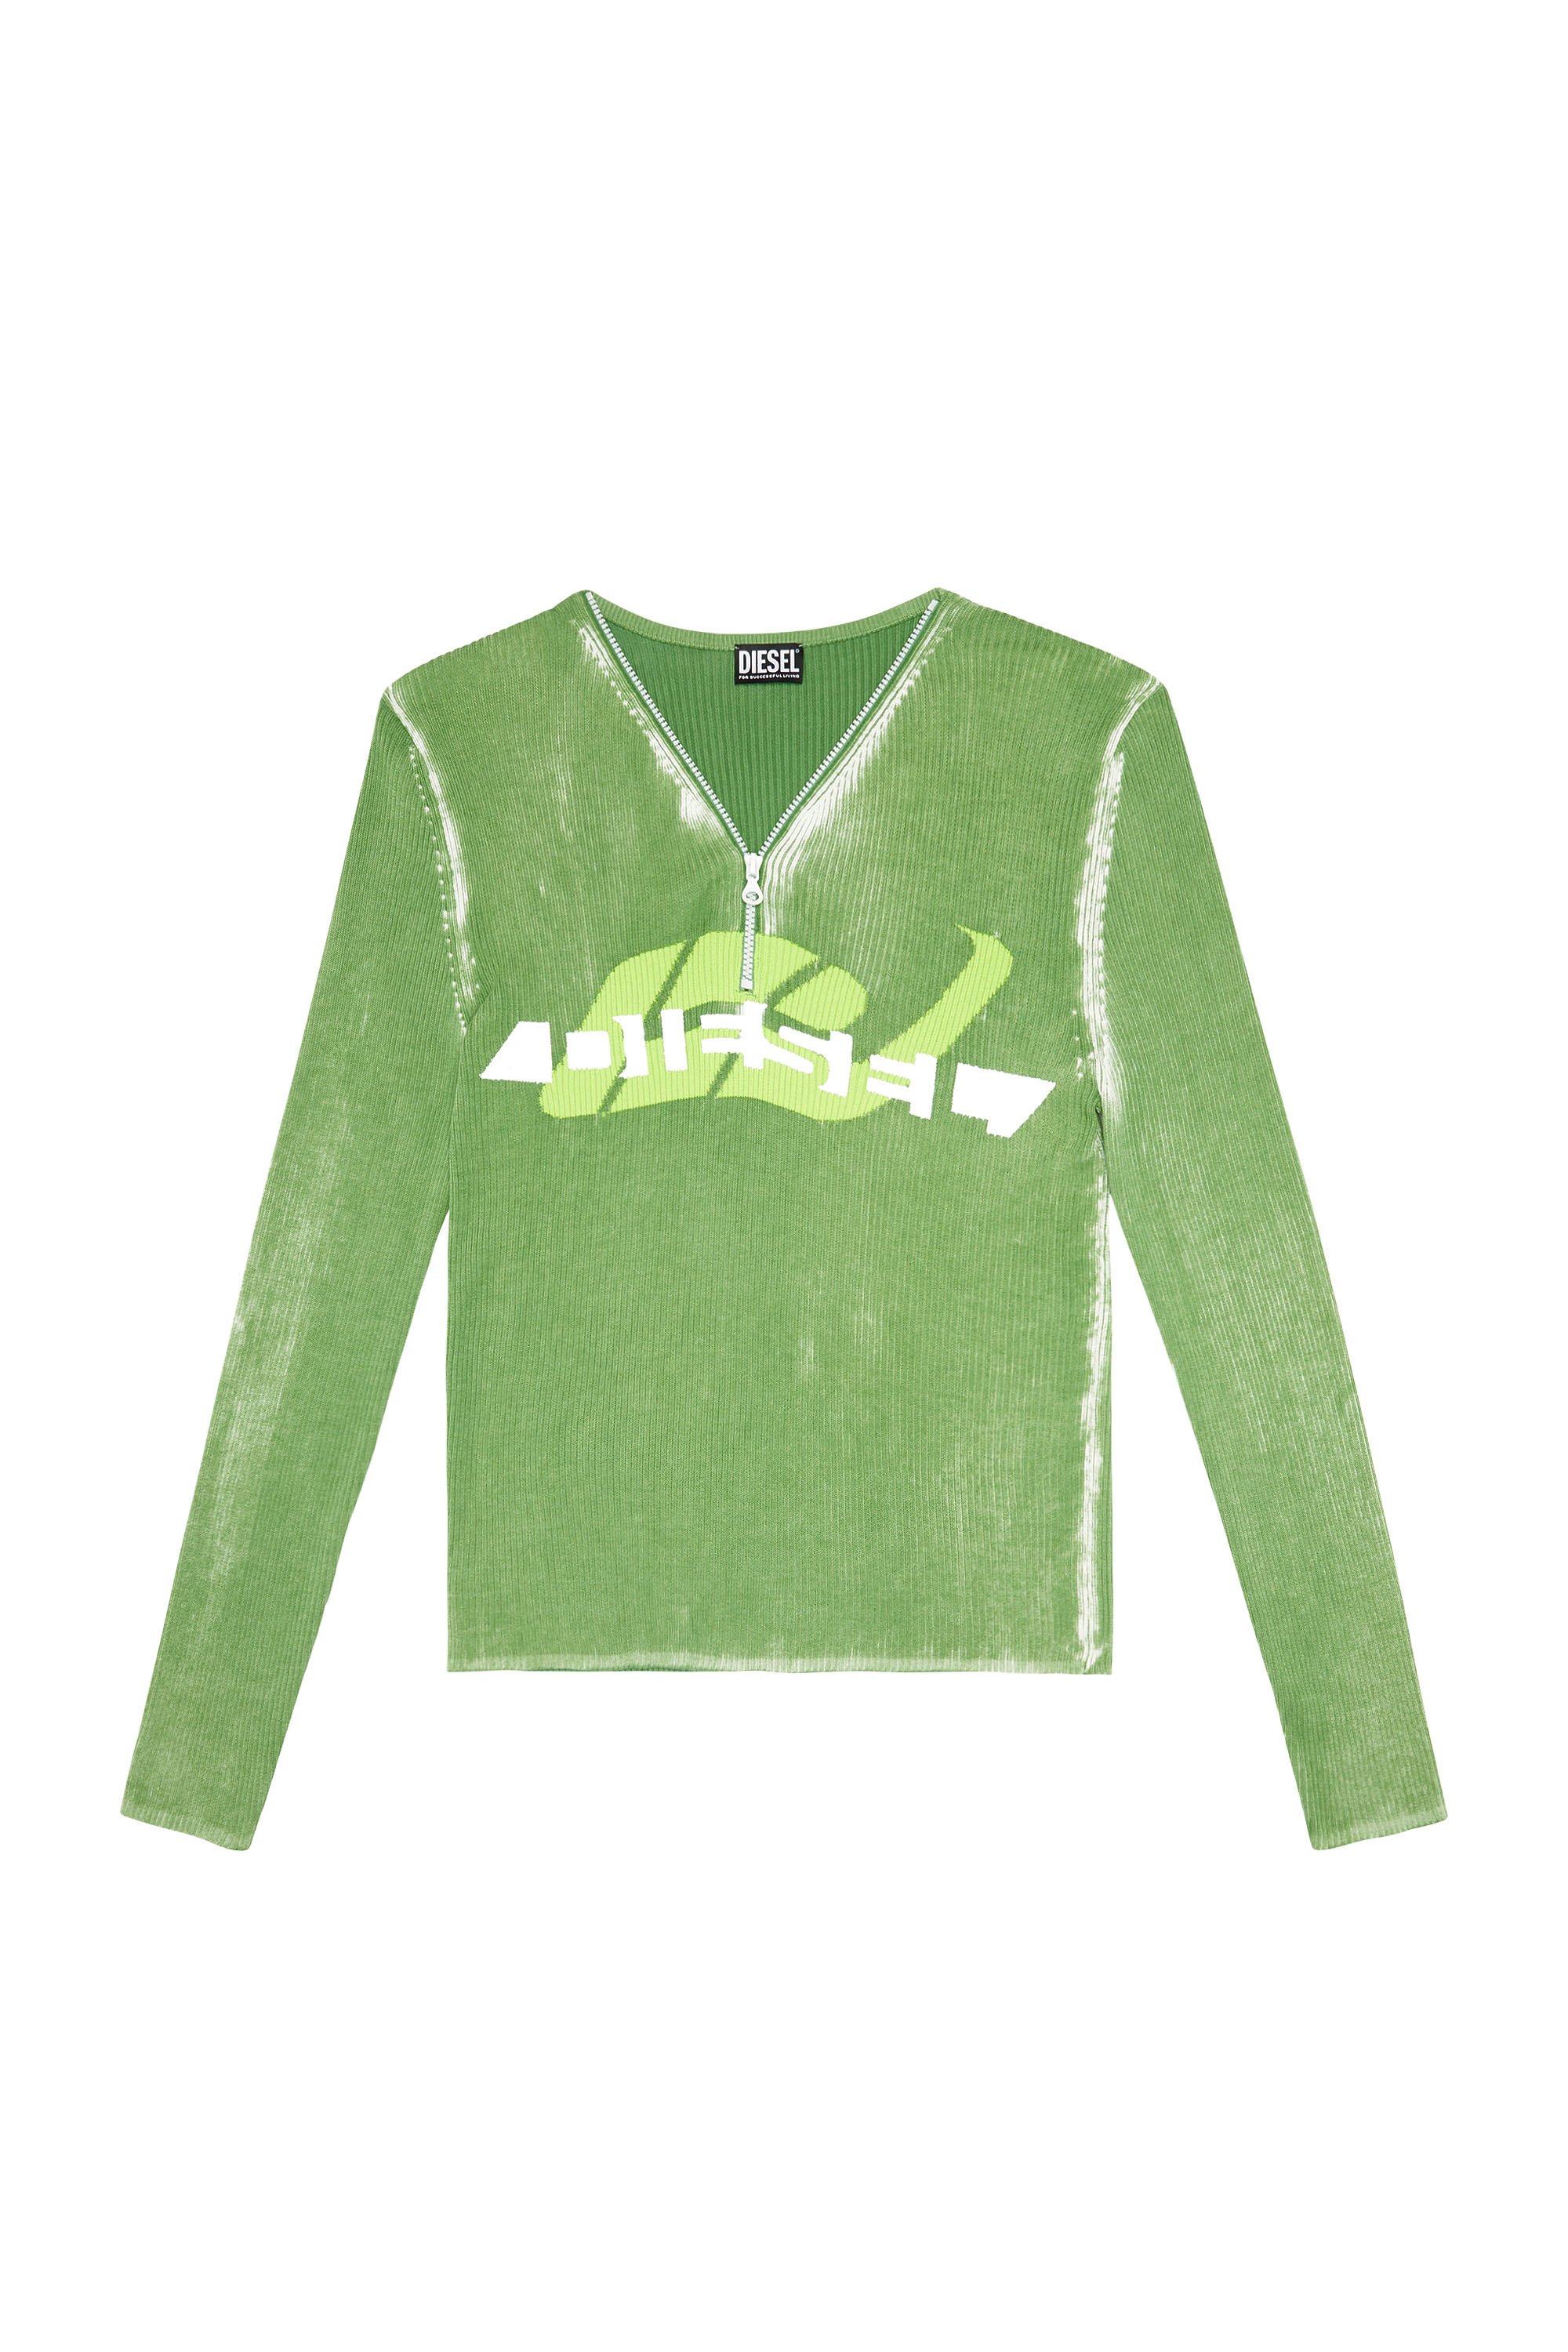 K-ALDWELL Man: Knit top with logo graphic | Diesel